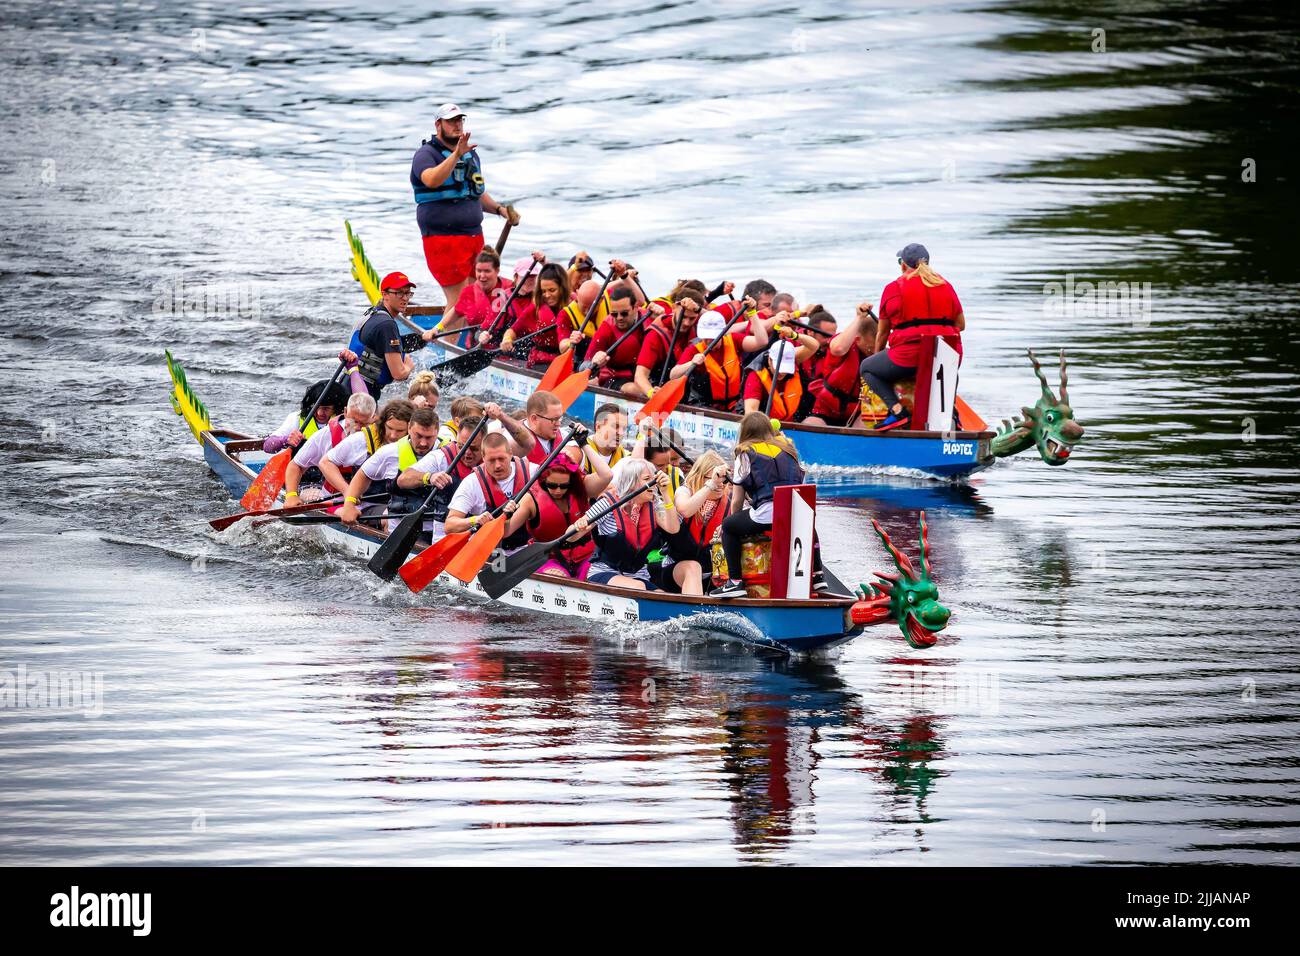 Two Dragon Boats racing along the River Mersey Stock Photo